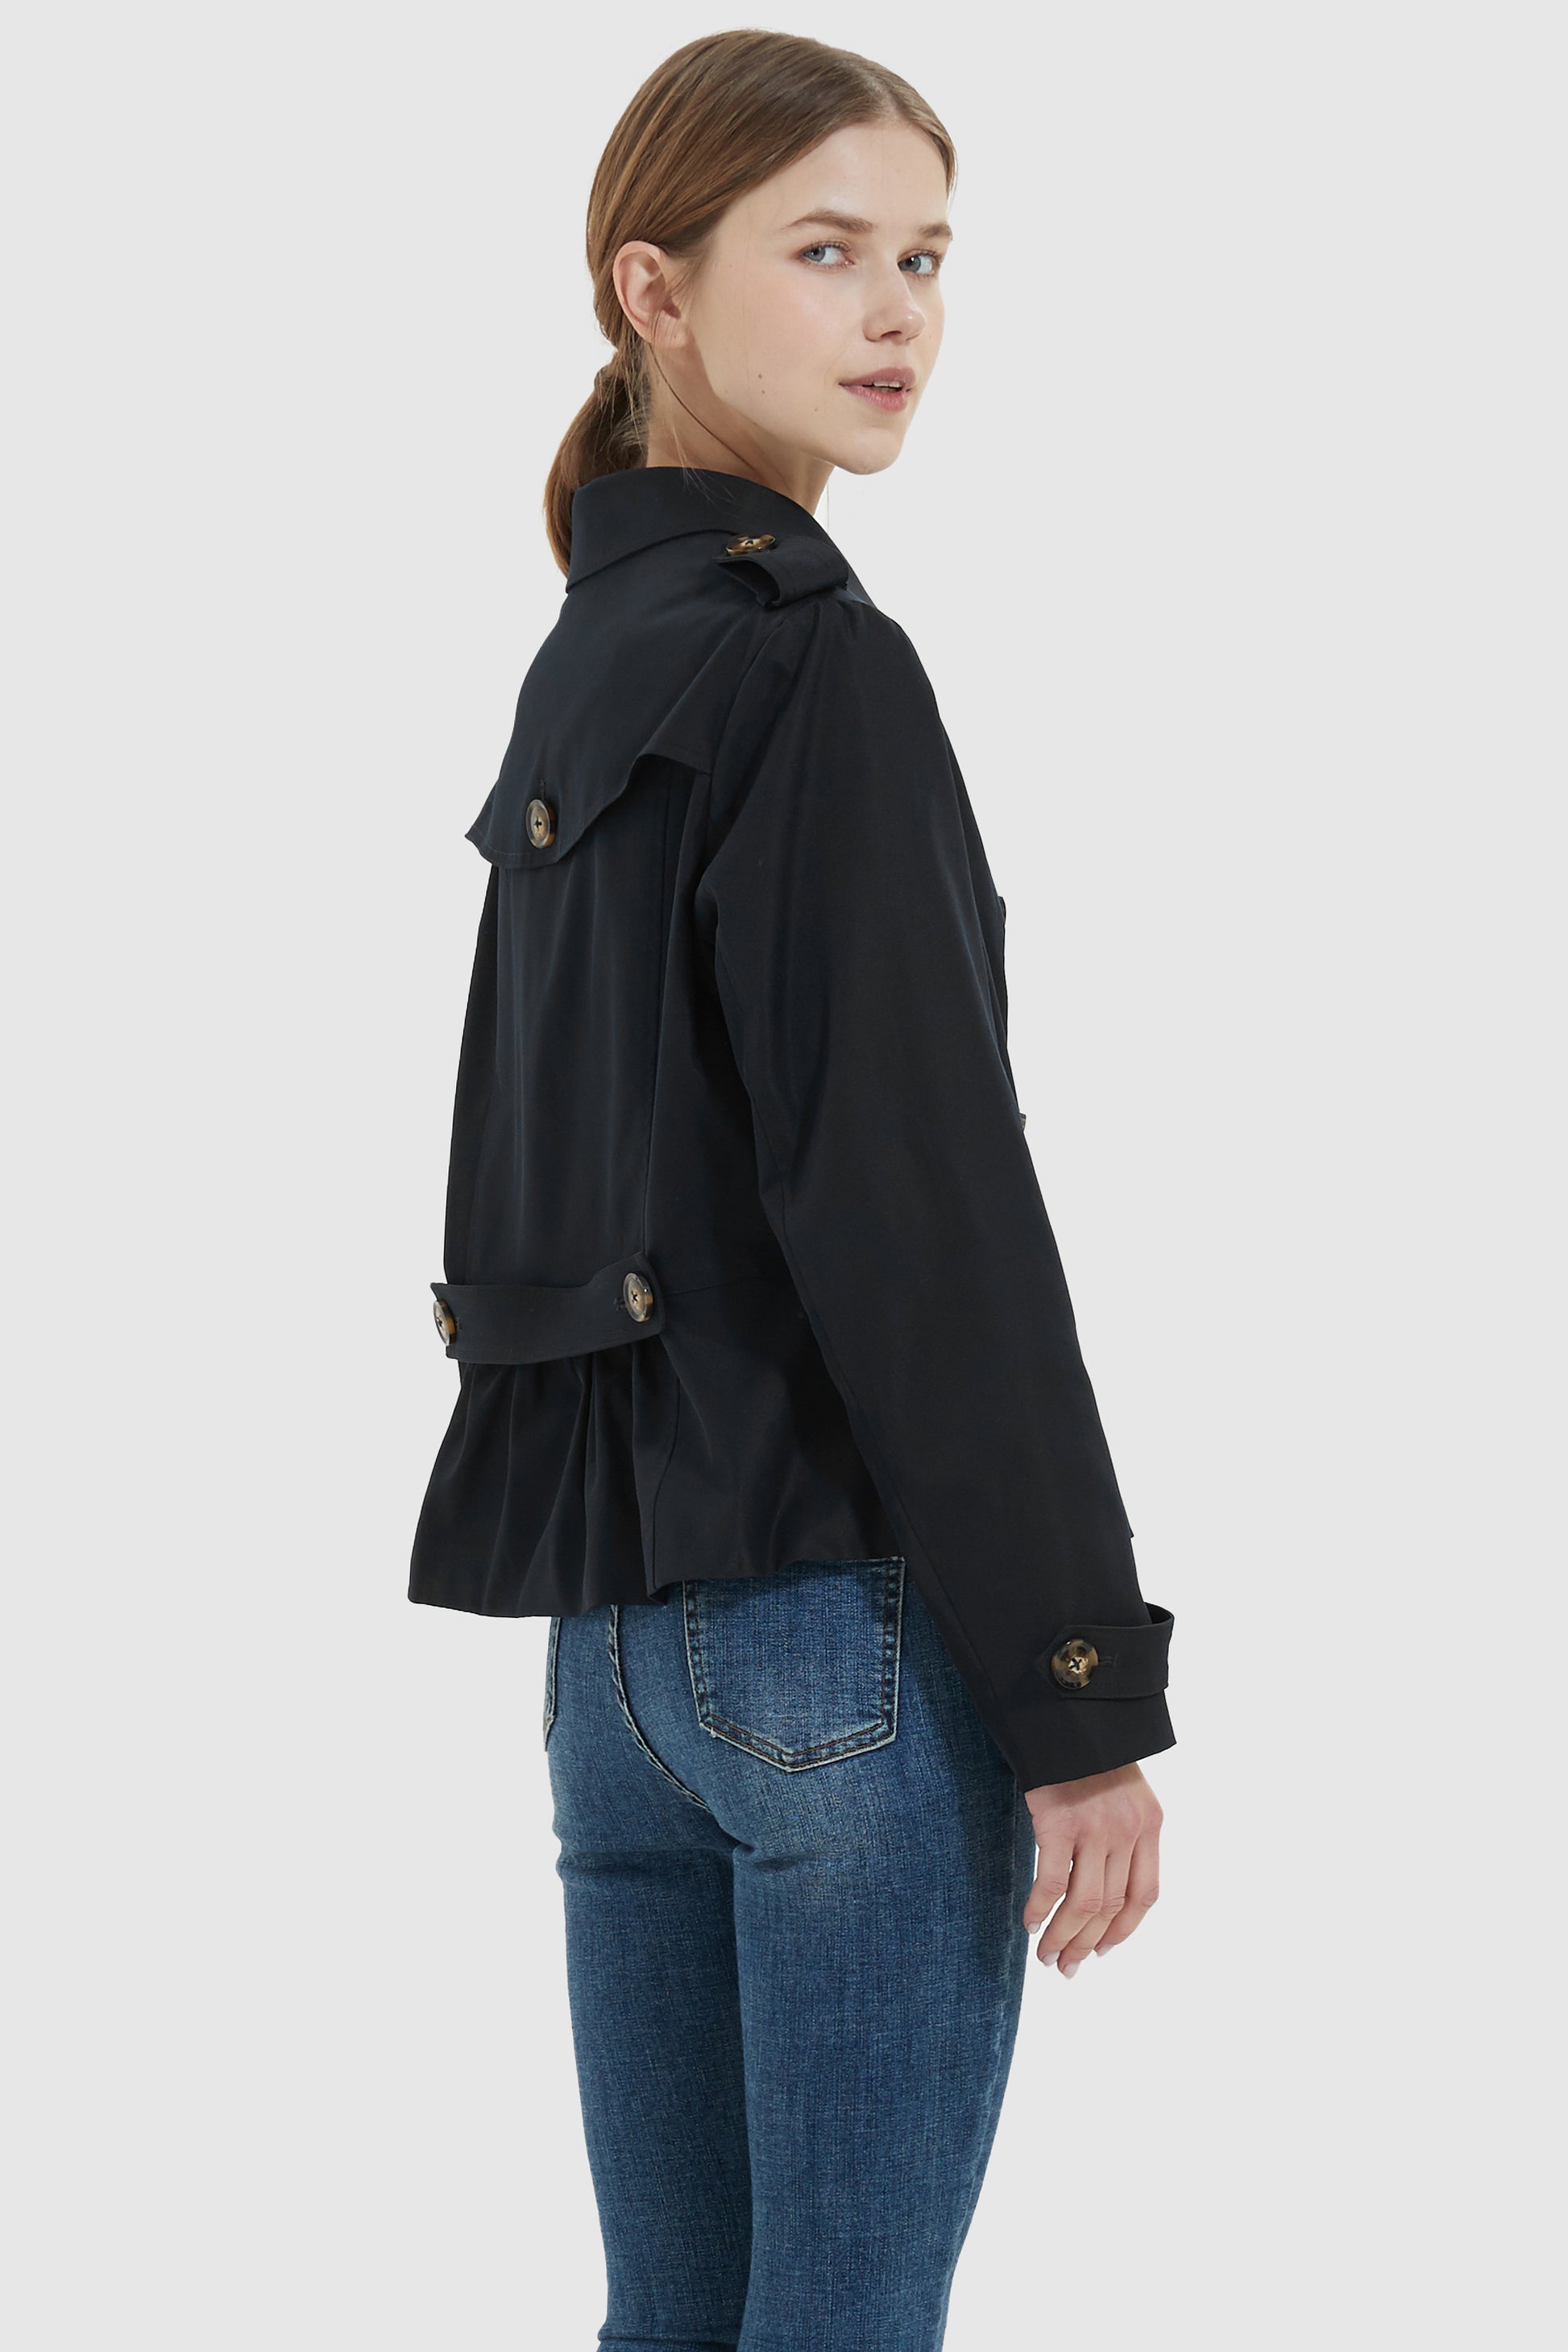 AUBREY | Short double breasted belted trench coat || AUBREY | Trench-coat  court à double boutonnage ceinturé